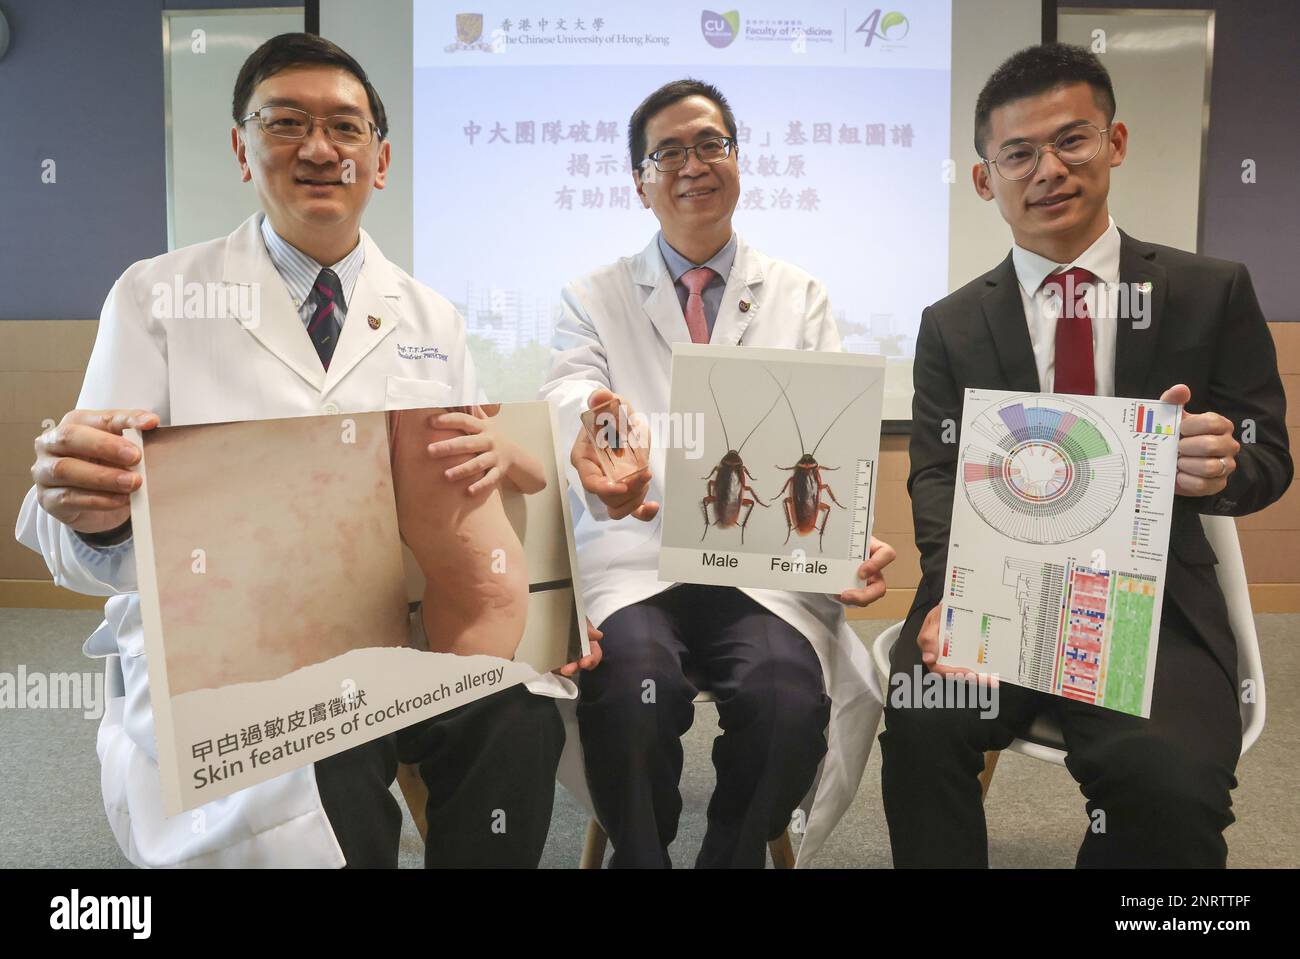 (L to R) Chinese University of Hong Kong's (CUHK) MedicineHH Postdoctoral Fellow in the School of Biomedical Sciences Xiong Ding, Professor in the School of Biomedical Sciences Stephen Tsui Kwok-wing, and Professor in the Department of Paediatrics Leung Ting-fan, at a presser on the development of precision immunotherapy on novel cockroach allergens, at the Li Ka Shing Medical Sciences Building, Prince of Wales Hospital in Sha Tin. 16FEB23 SCMP / Jonathan Wong Stock Photo